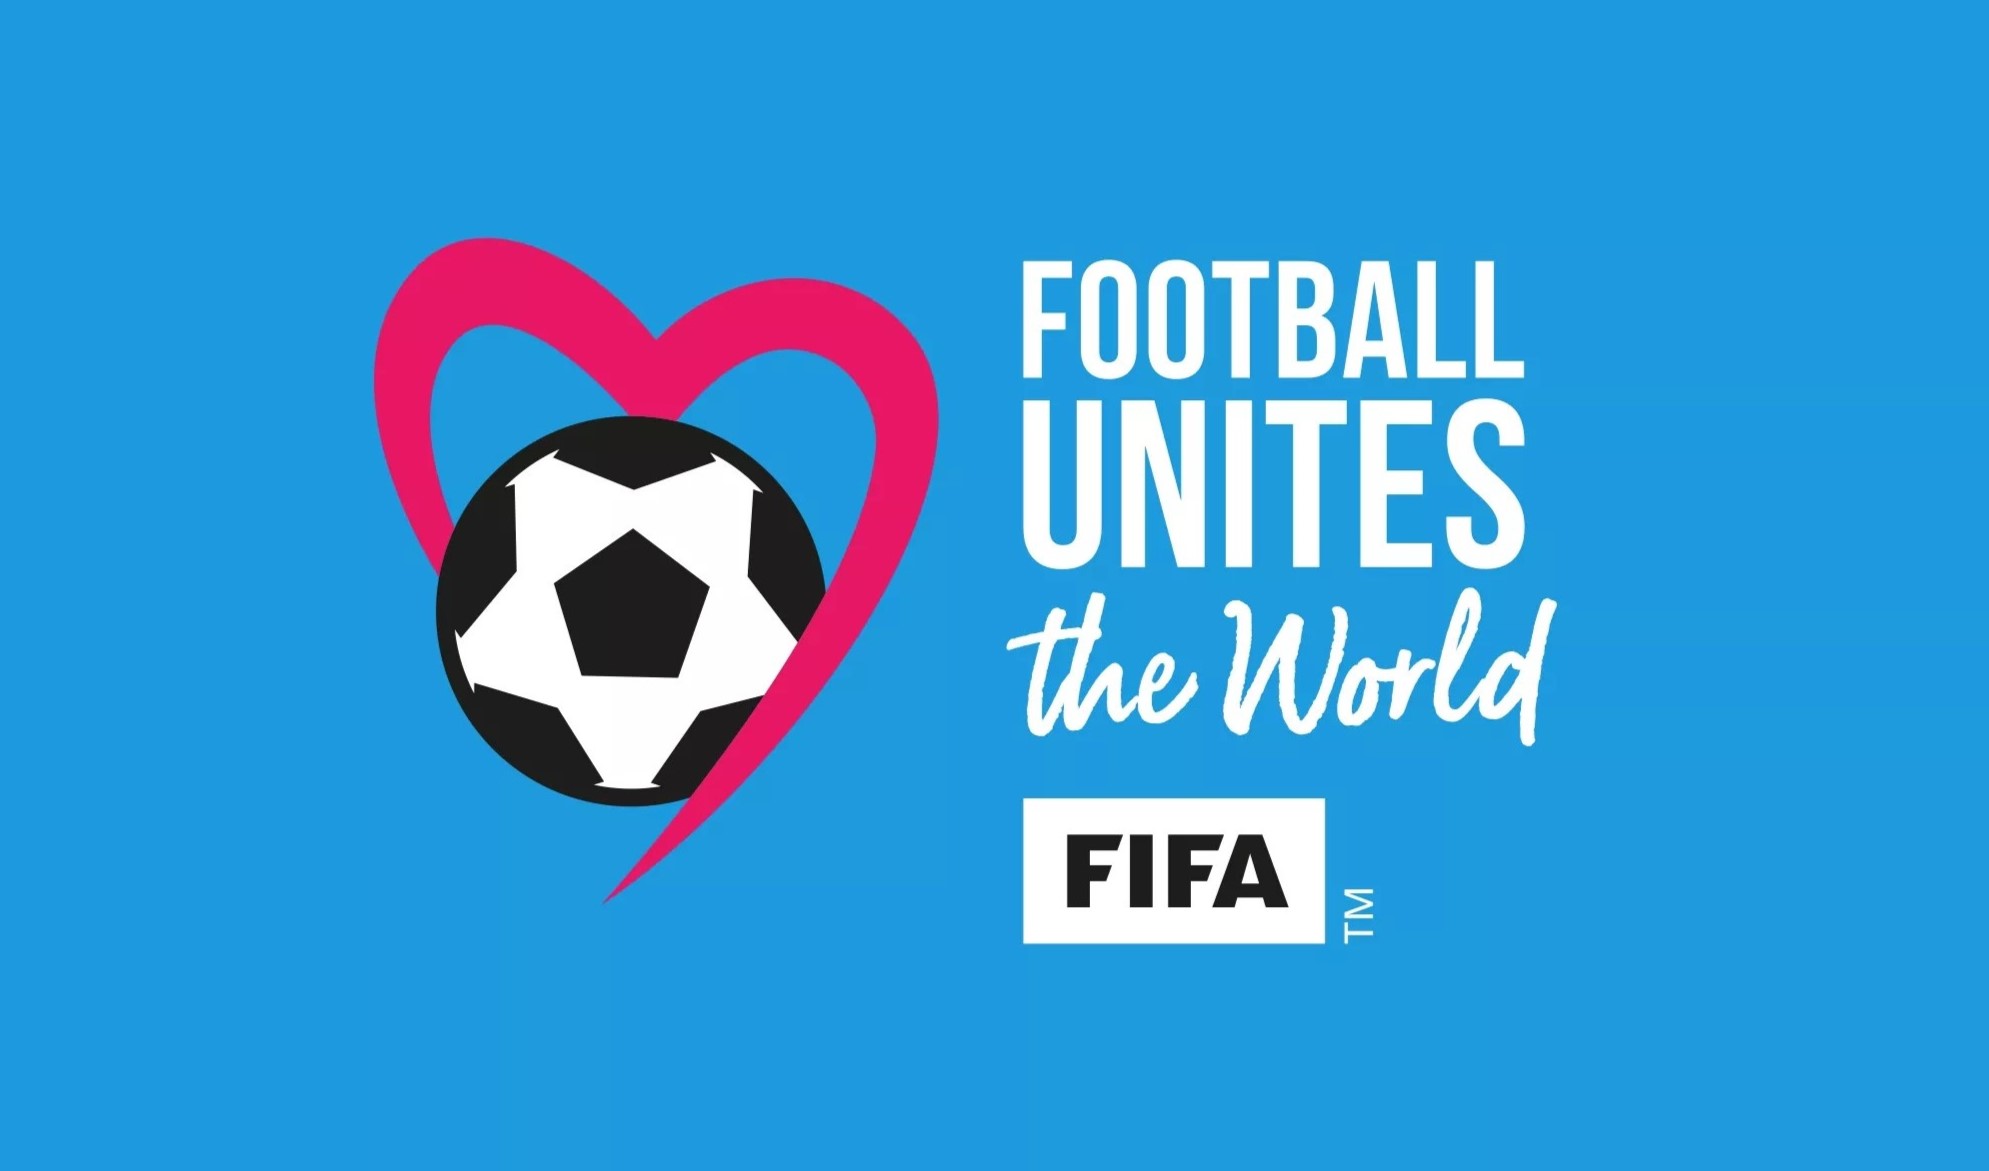 FIFA Foundation uses football to spread awareness in Indonesia on World AIDS Day